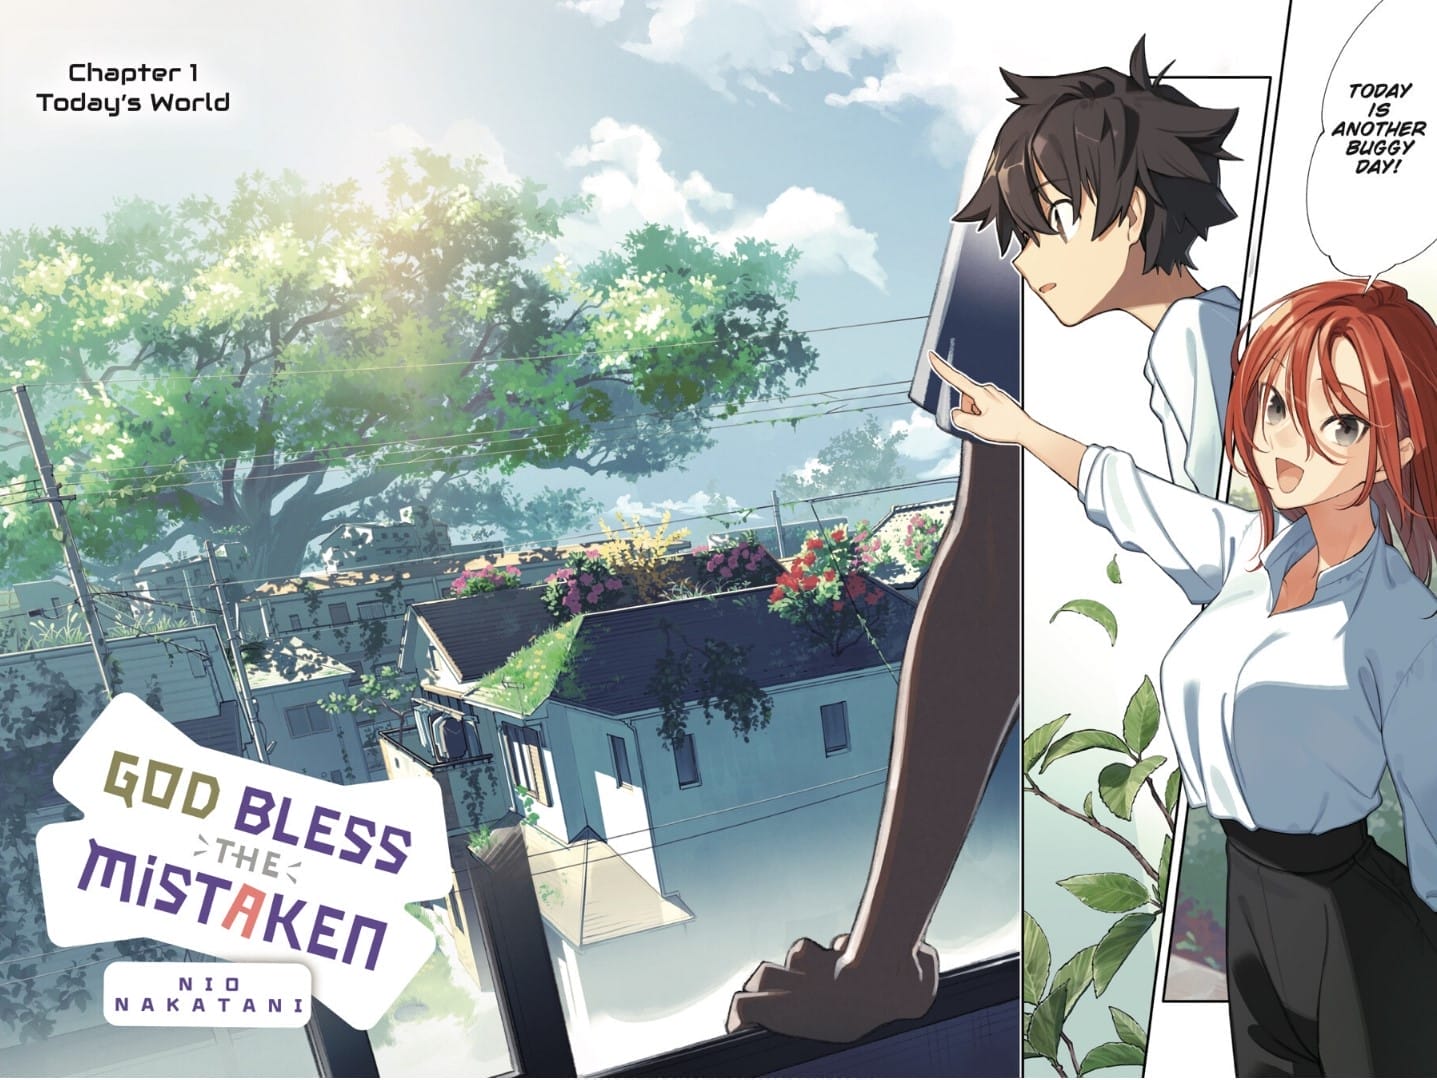 Full color spread from the manga God Bless the Mistaken, showing the characters looking out into a leafy neighborhood. Speech bubble text reads: "Today is another buggy day!"